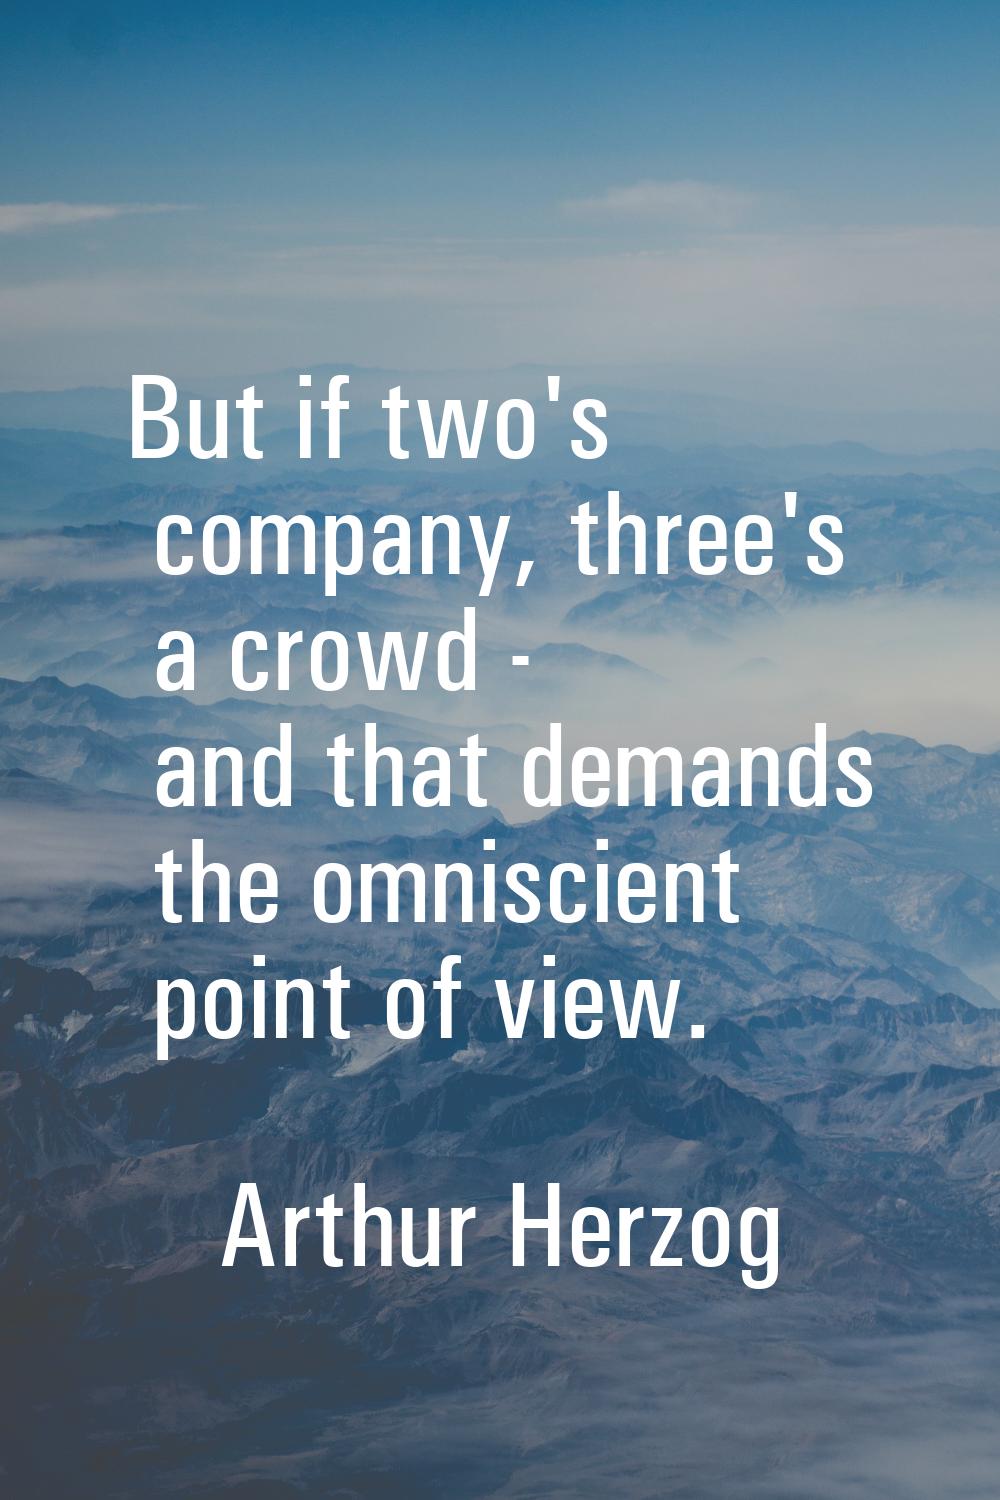 But if two's company, three's a crowd - and that demands the omniscient point of view.